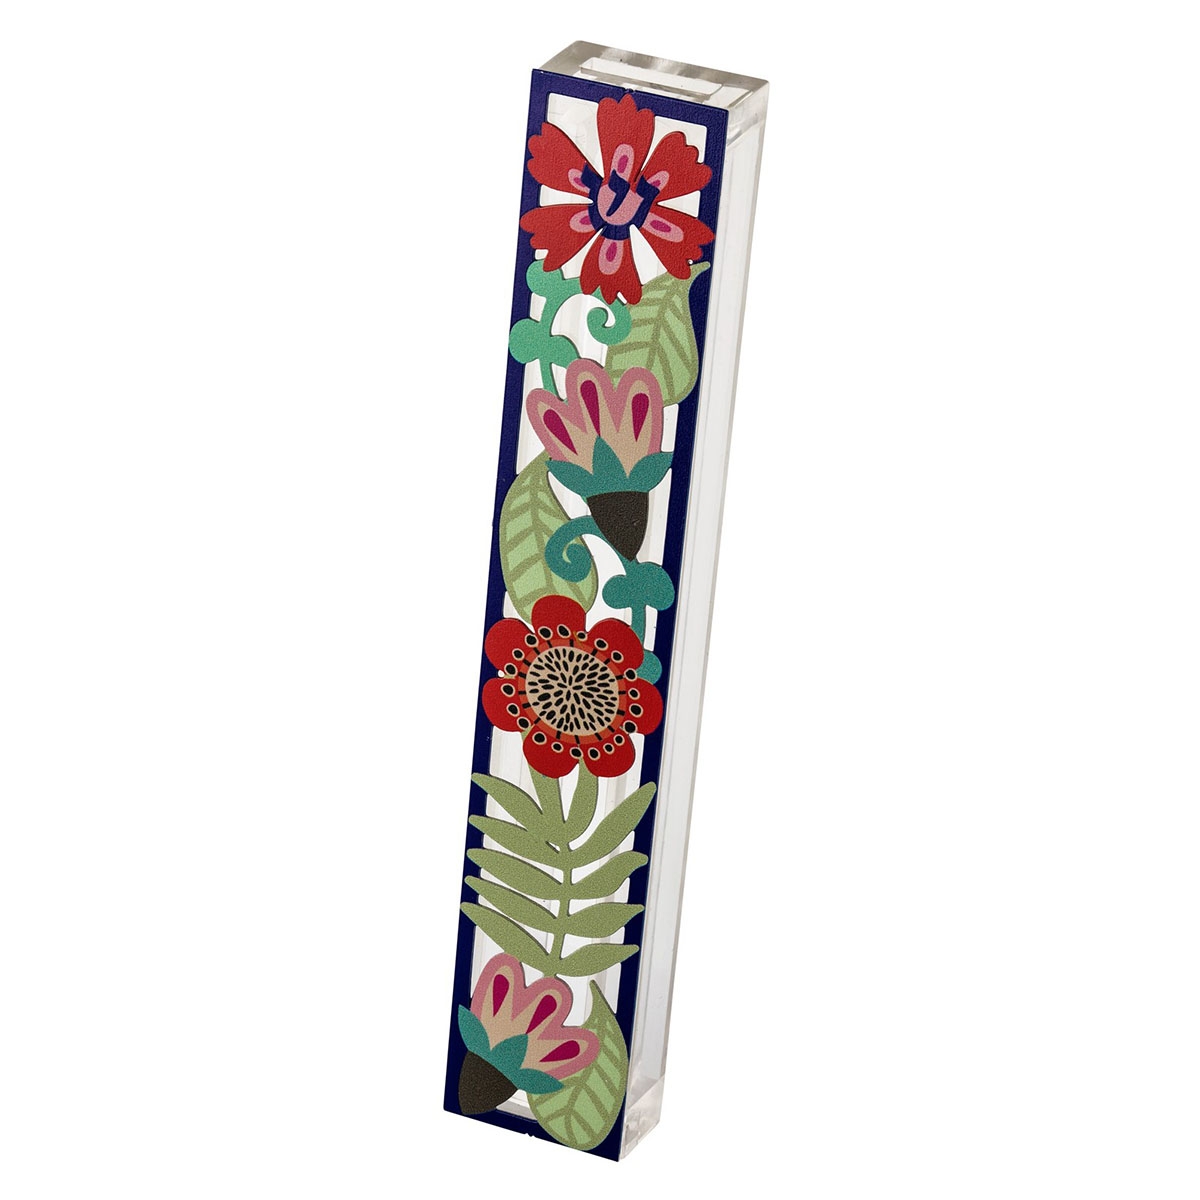 Dorit Judaica Acrylic Mezuzah Case With Colorful Flowers and Leaves Design - 1